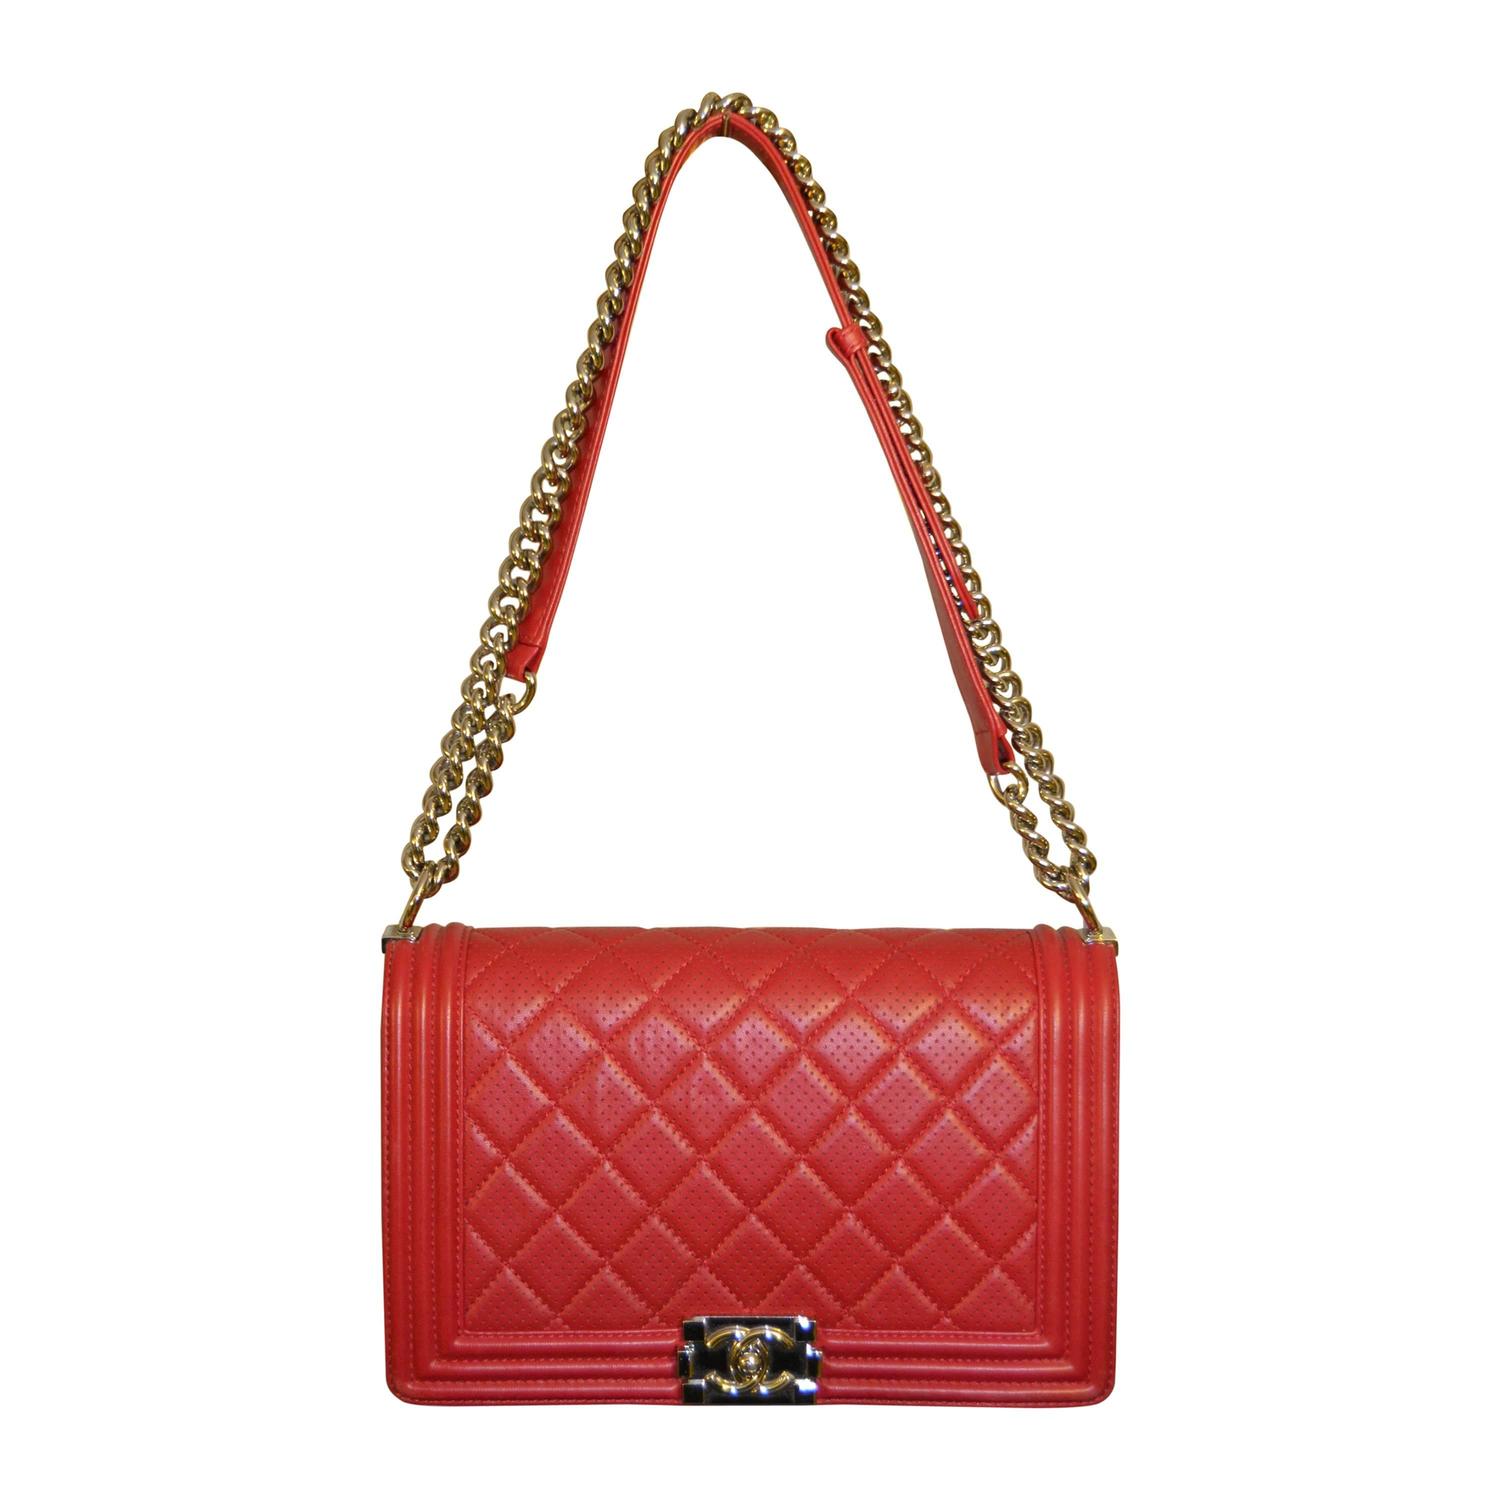 2000s Chanel boy red perforated lambskin bag at 1stdibs